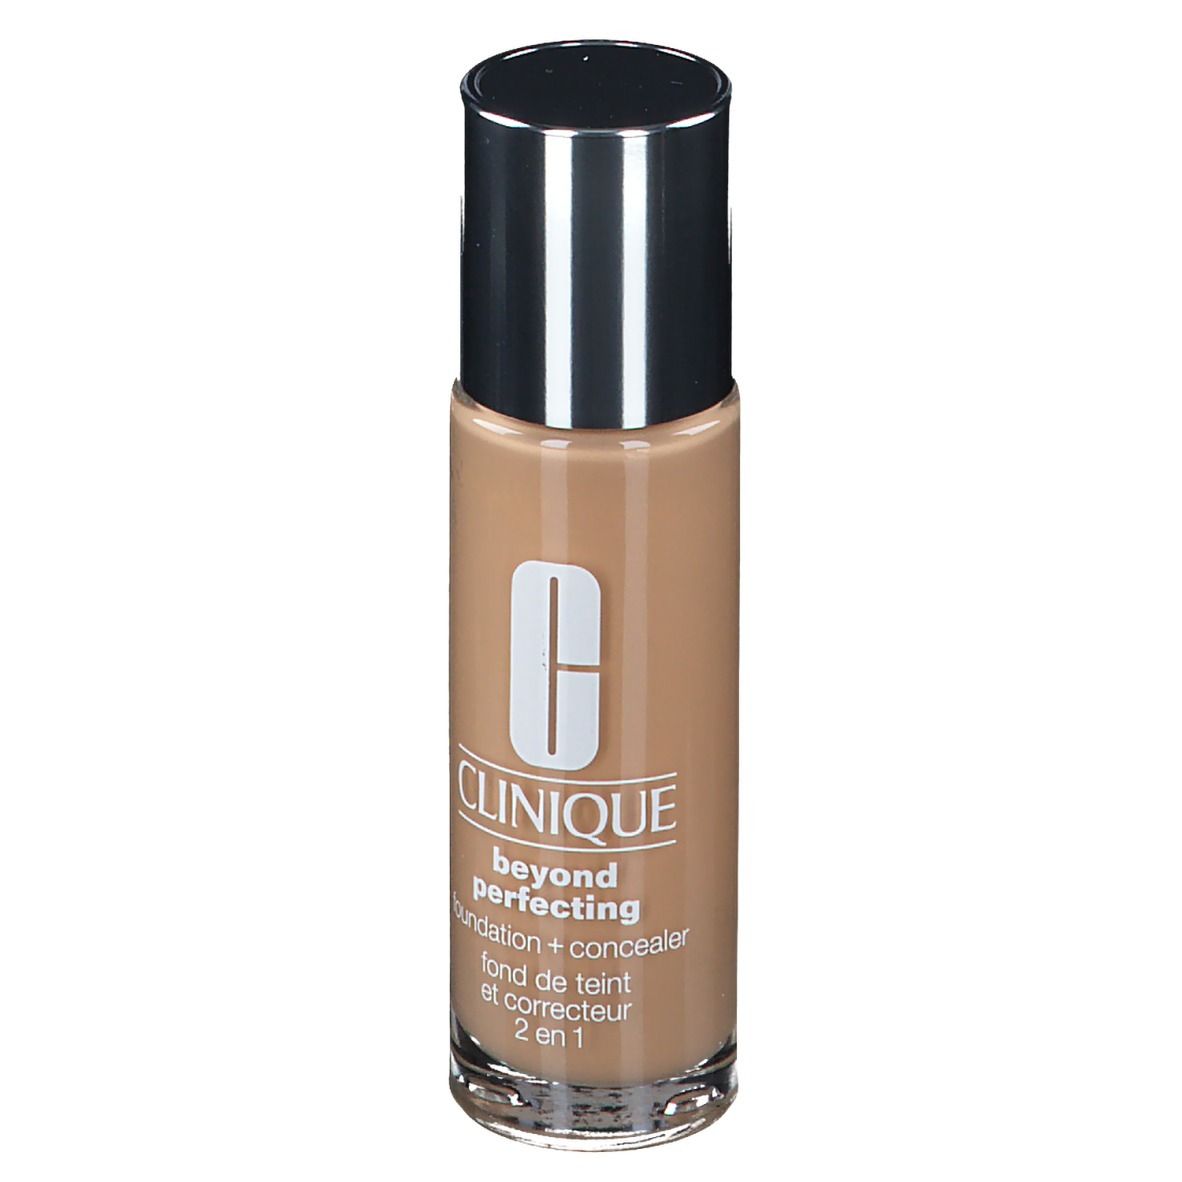 CLINIQUE Beyond Perfecting™ Foundation and Concealer 09 Neutral